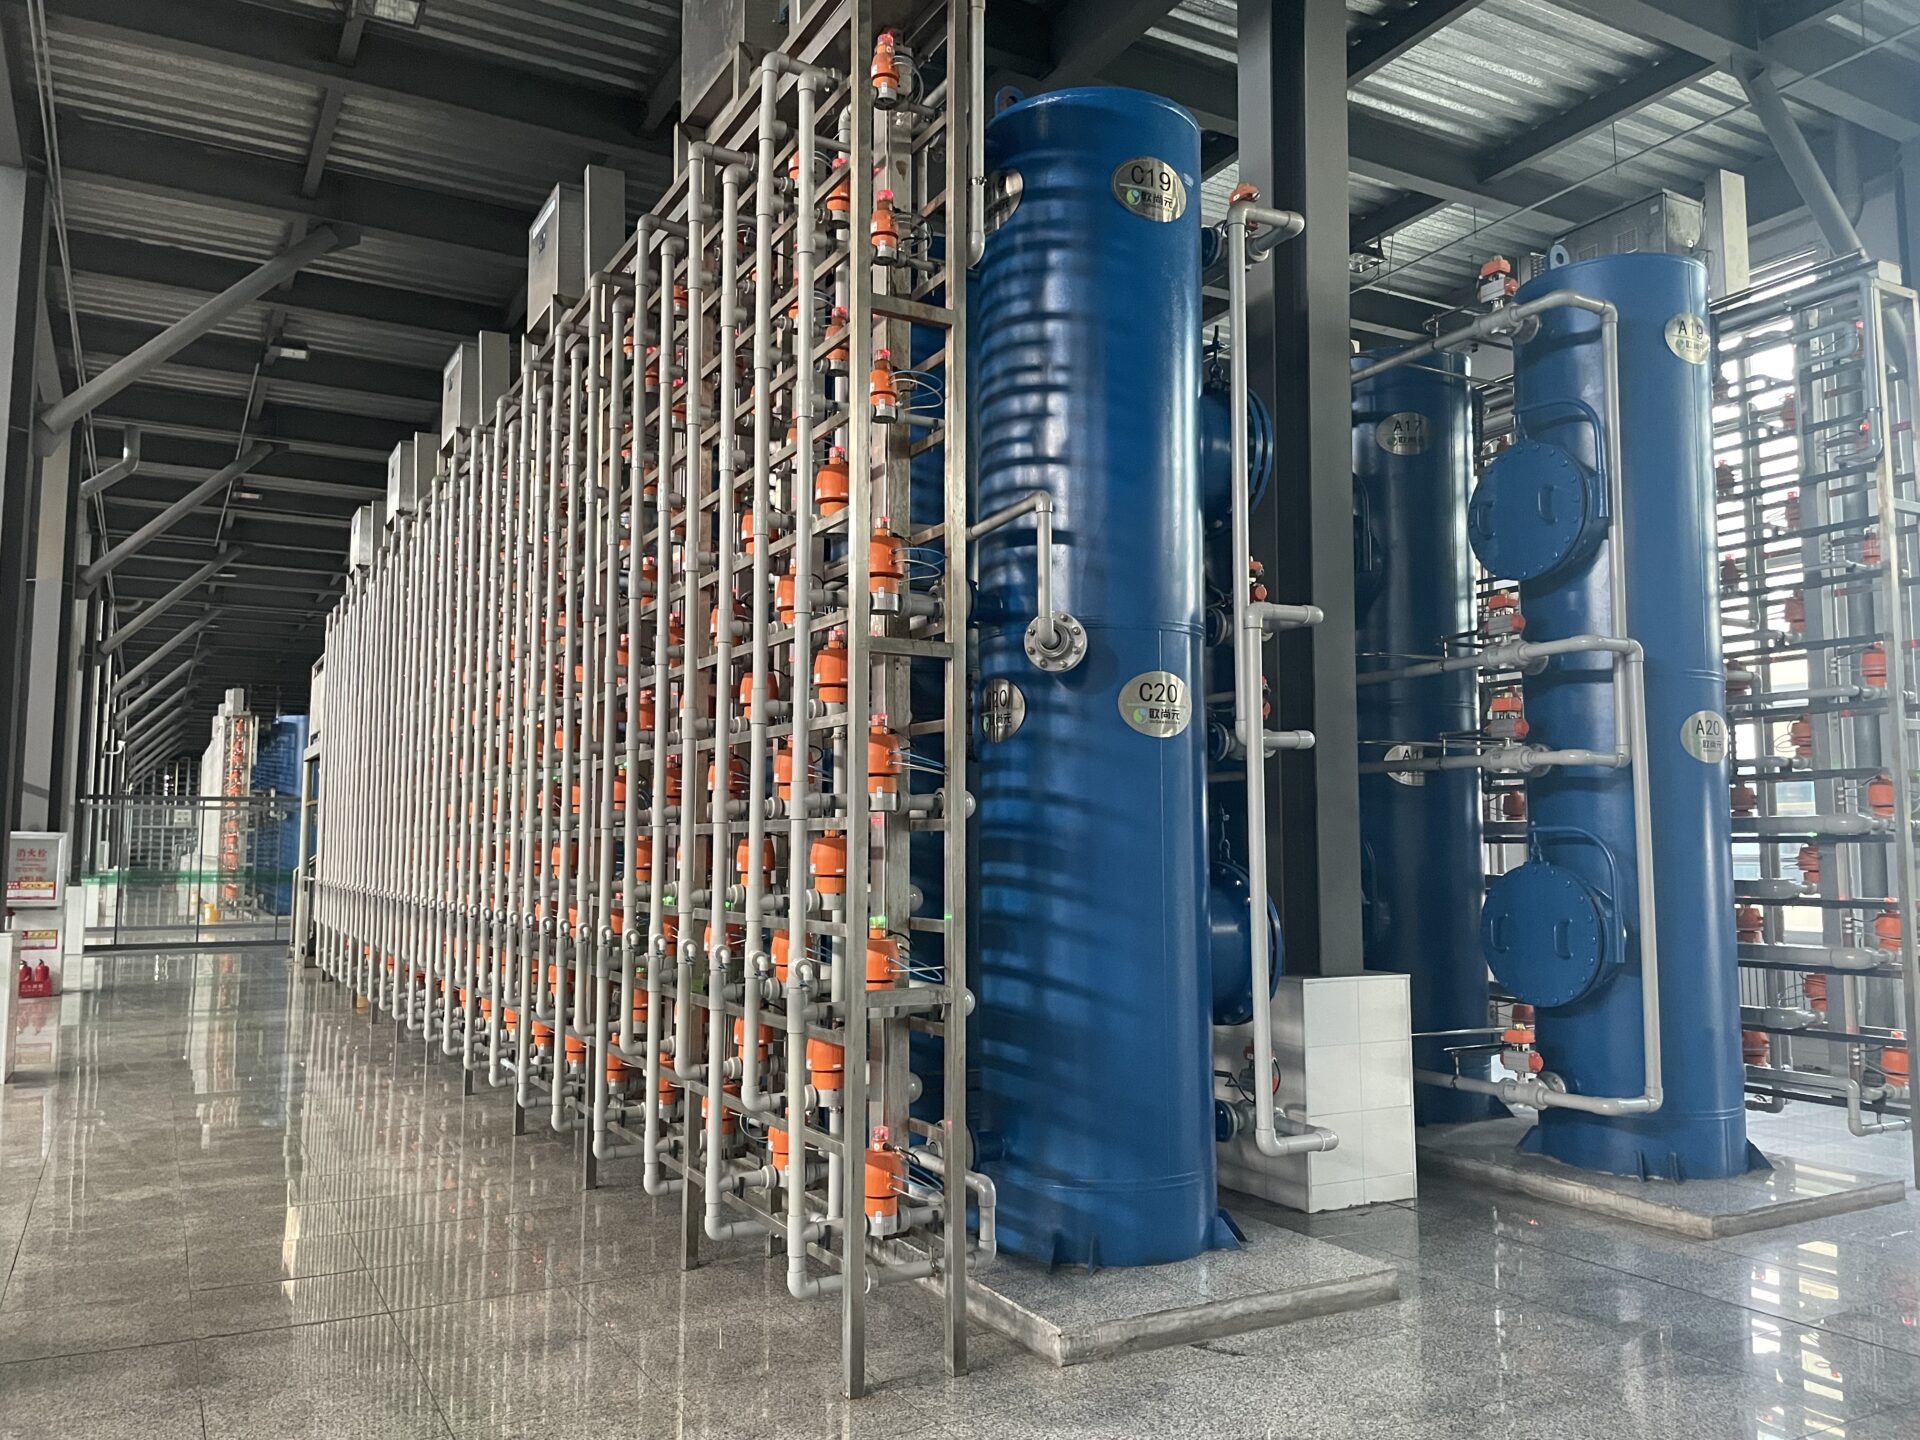 GF Piping Systems Supplies 5,000 Valves for Revolutionized Bioplastics Production in China 